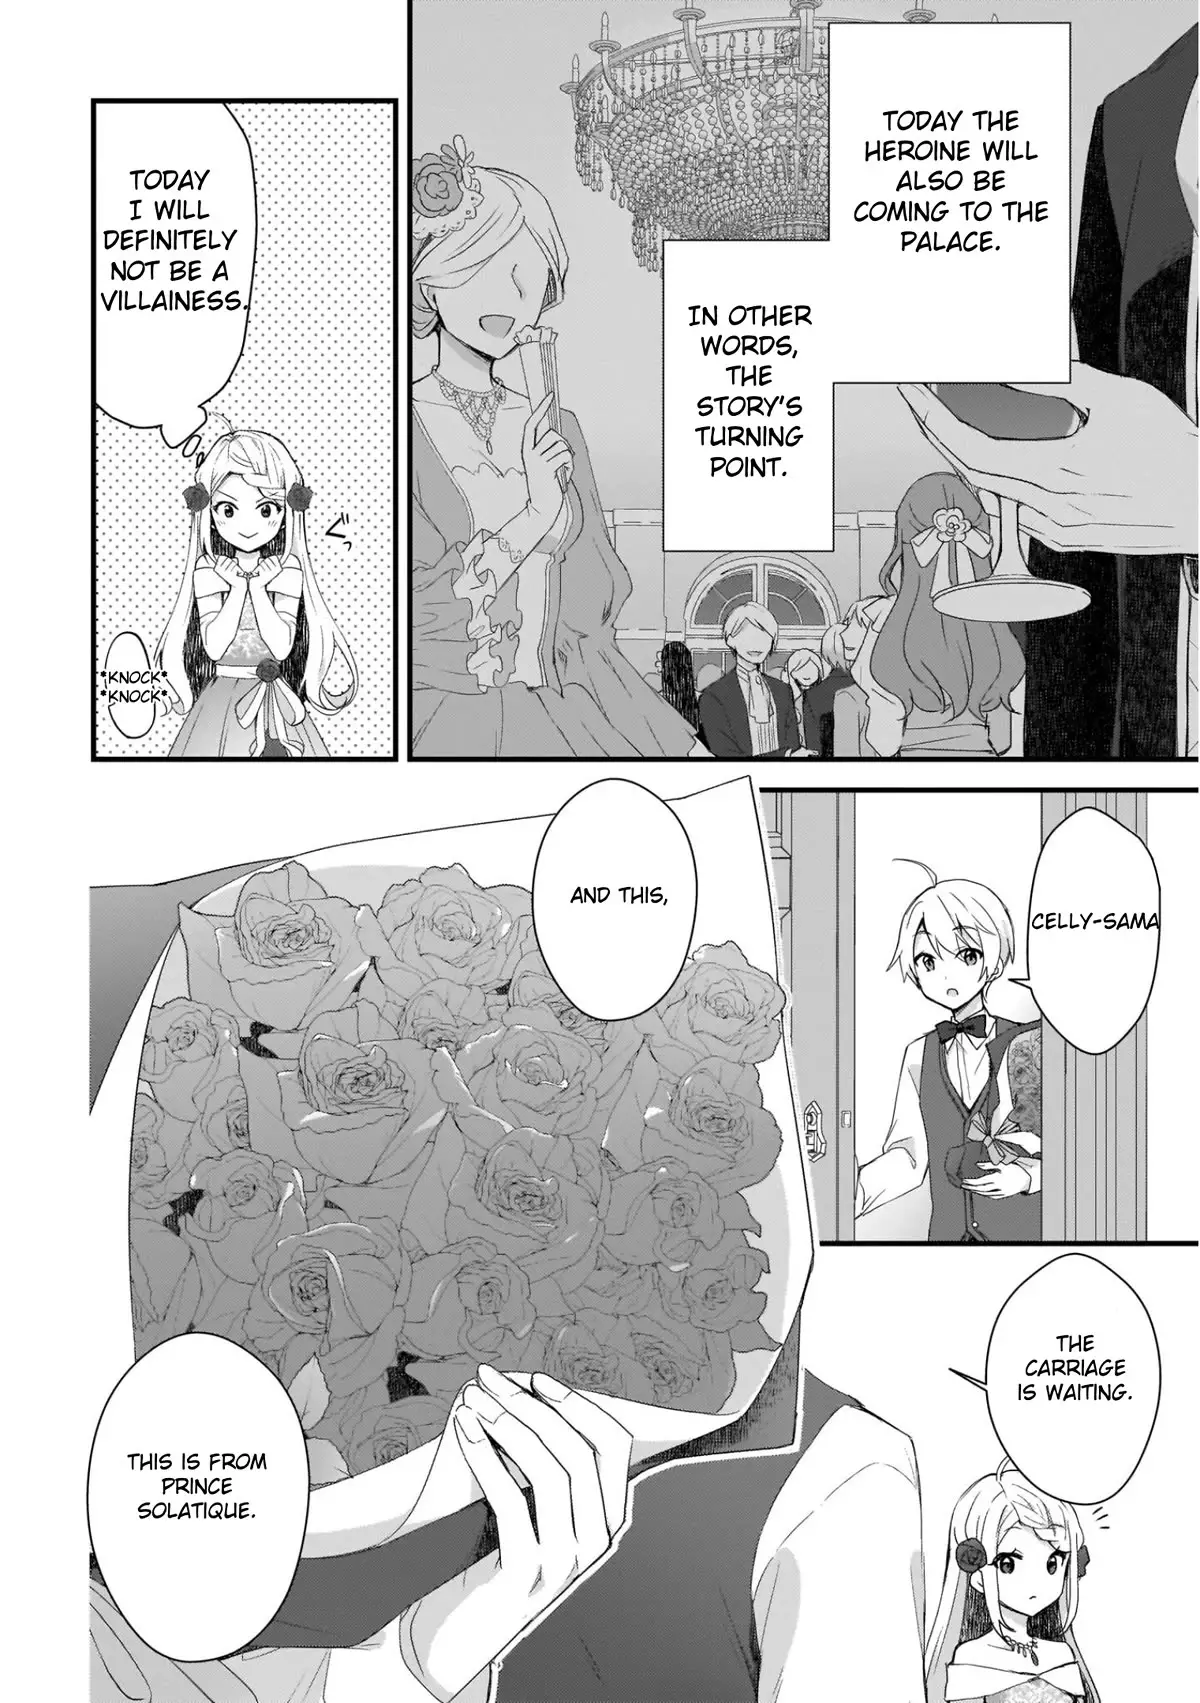 The Small Village Of The Young Lady Without Blessing - 6 page 8-1101f4c6